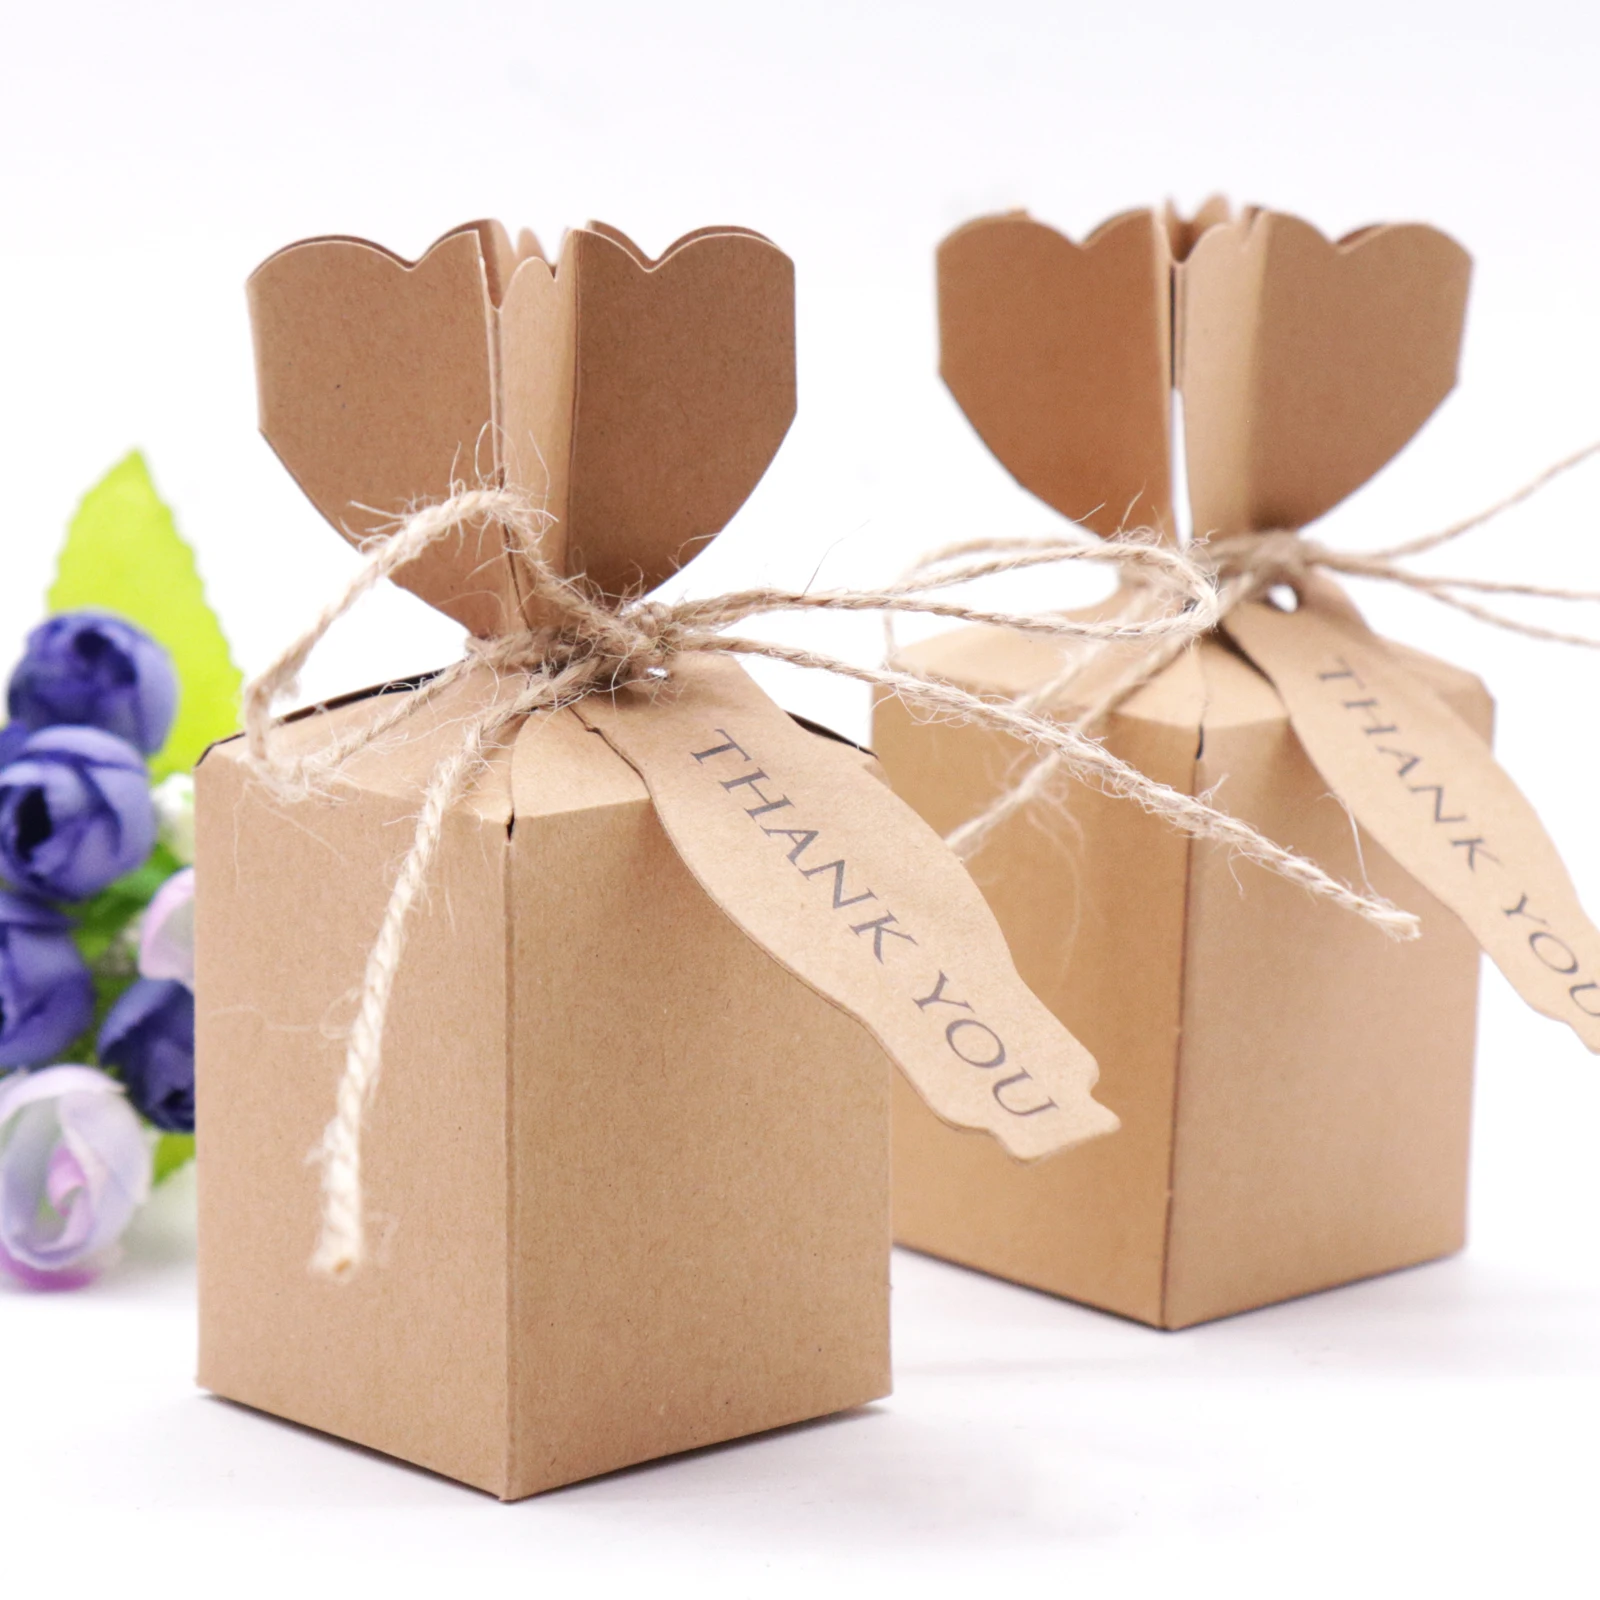 

10pcs Kraft Paper Brown Candy Bags Gift Boxes+Thank You Cards for Christmas Wedding Party Favors Decorations with Hemp Rope